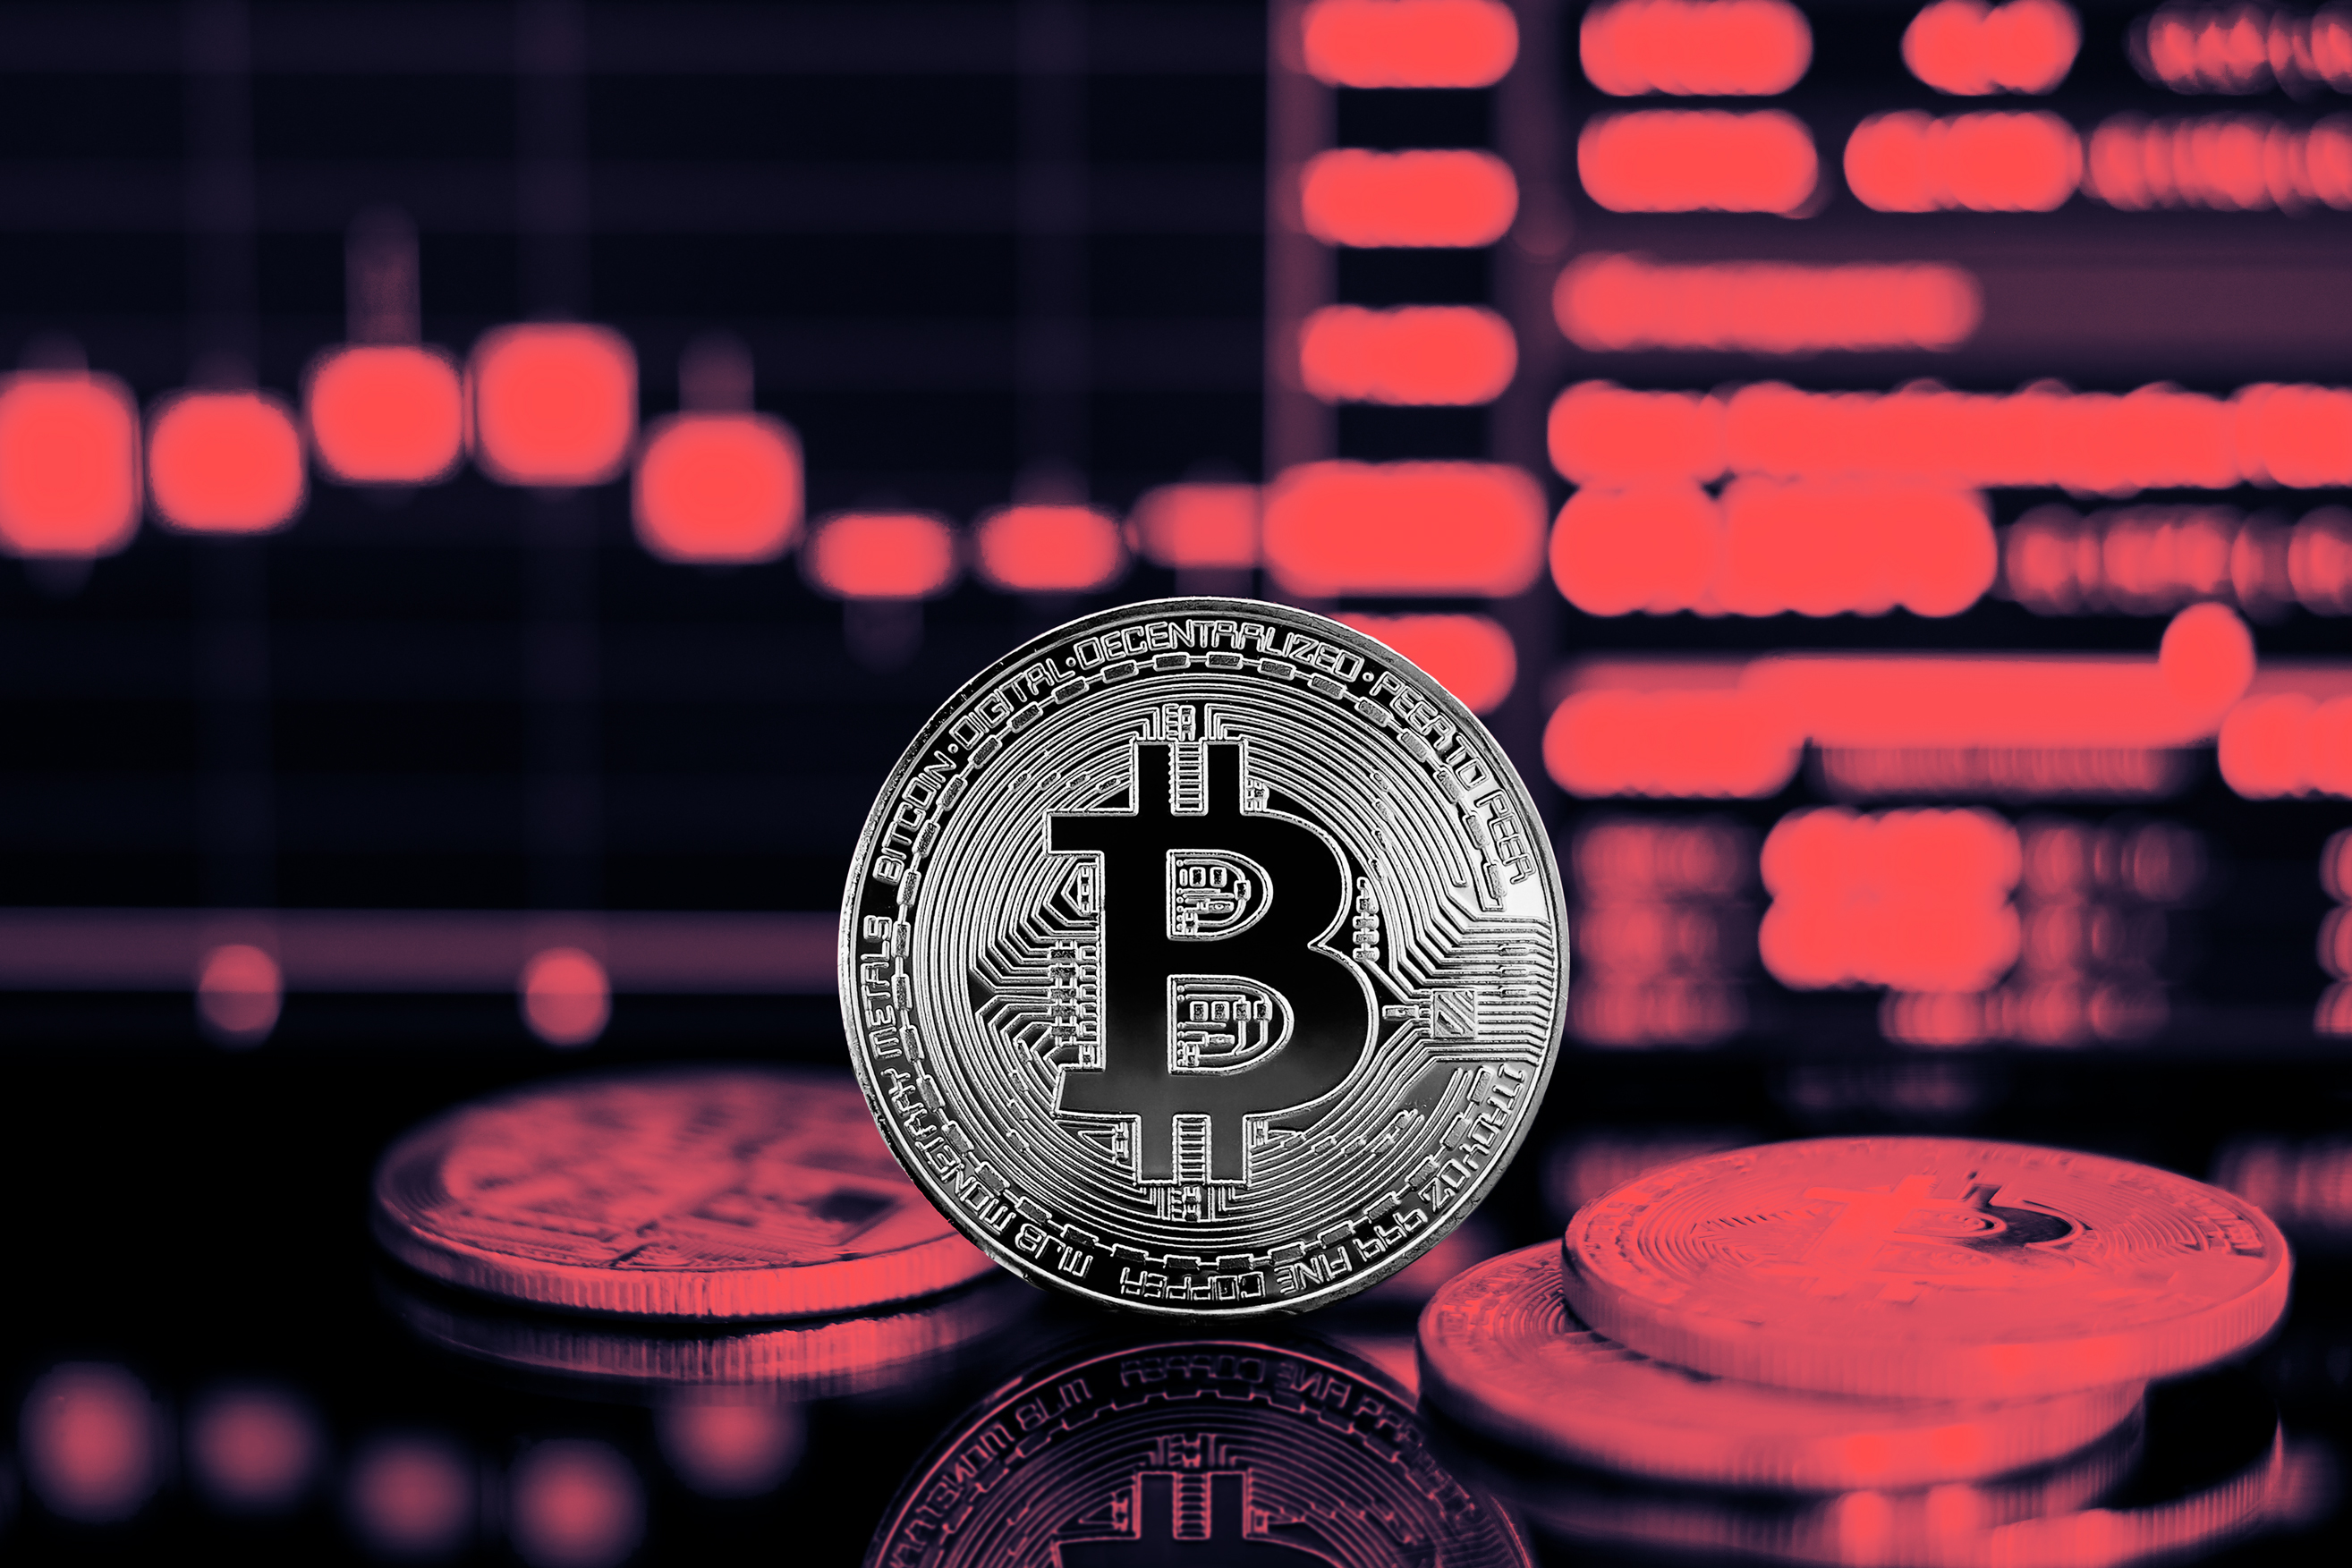 Bitcoin Price: Value of Bitcoin Down 75% From PeakMoney